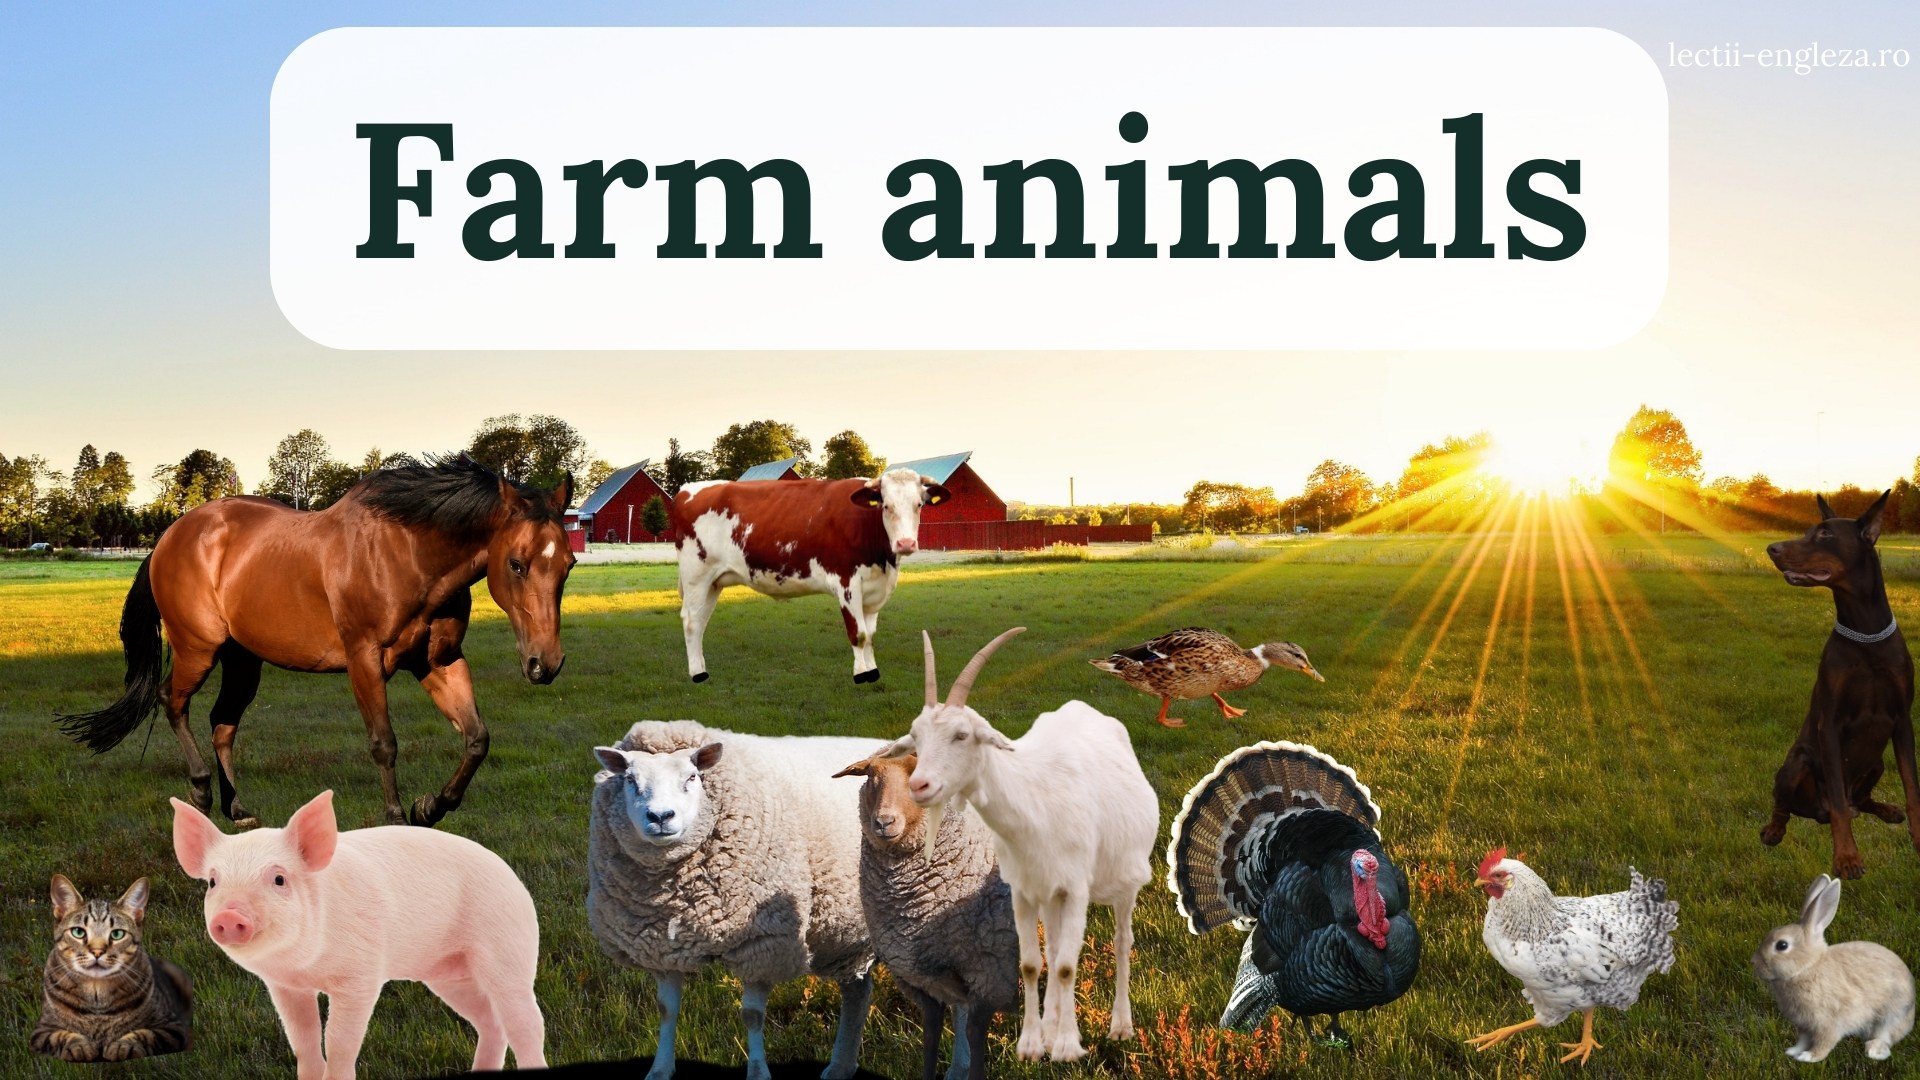 English vocabulary flashcards for young learners Farm animals